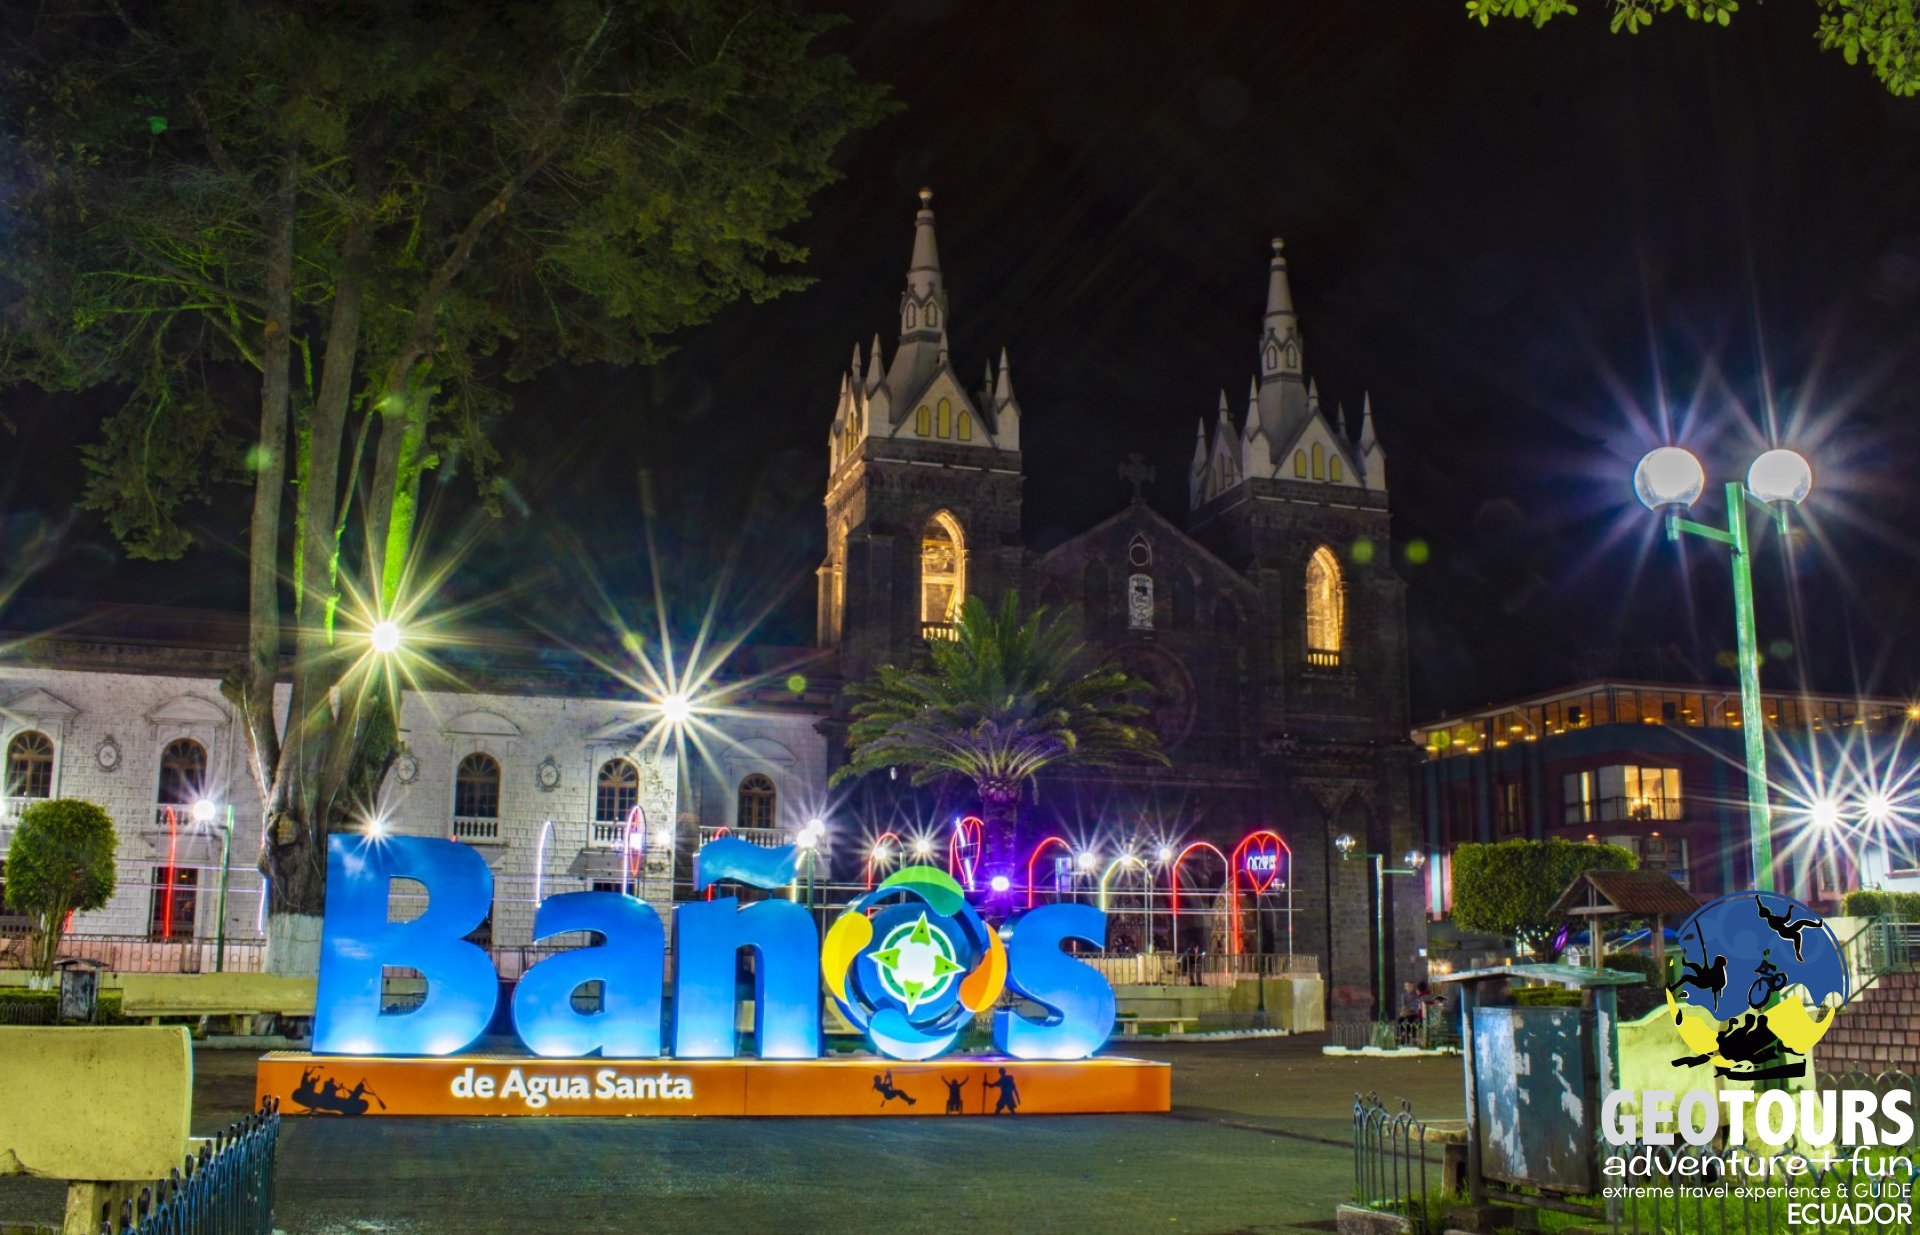 How to get to Banios from Quito?